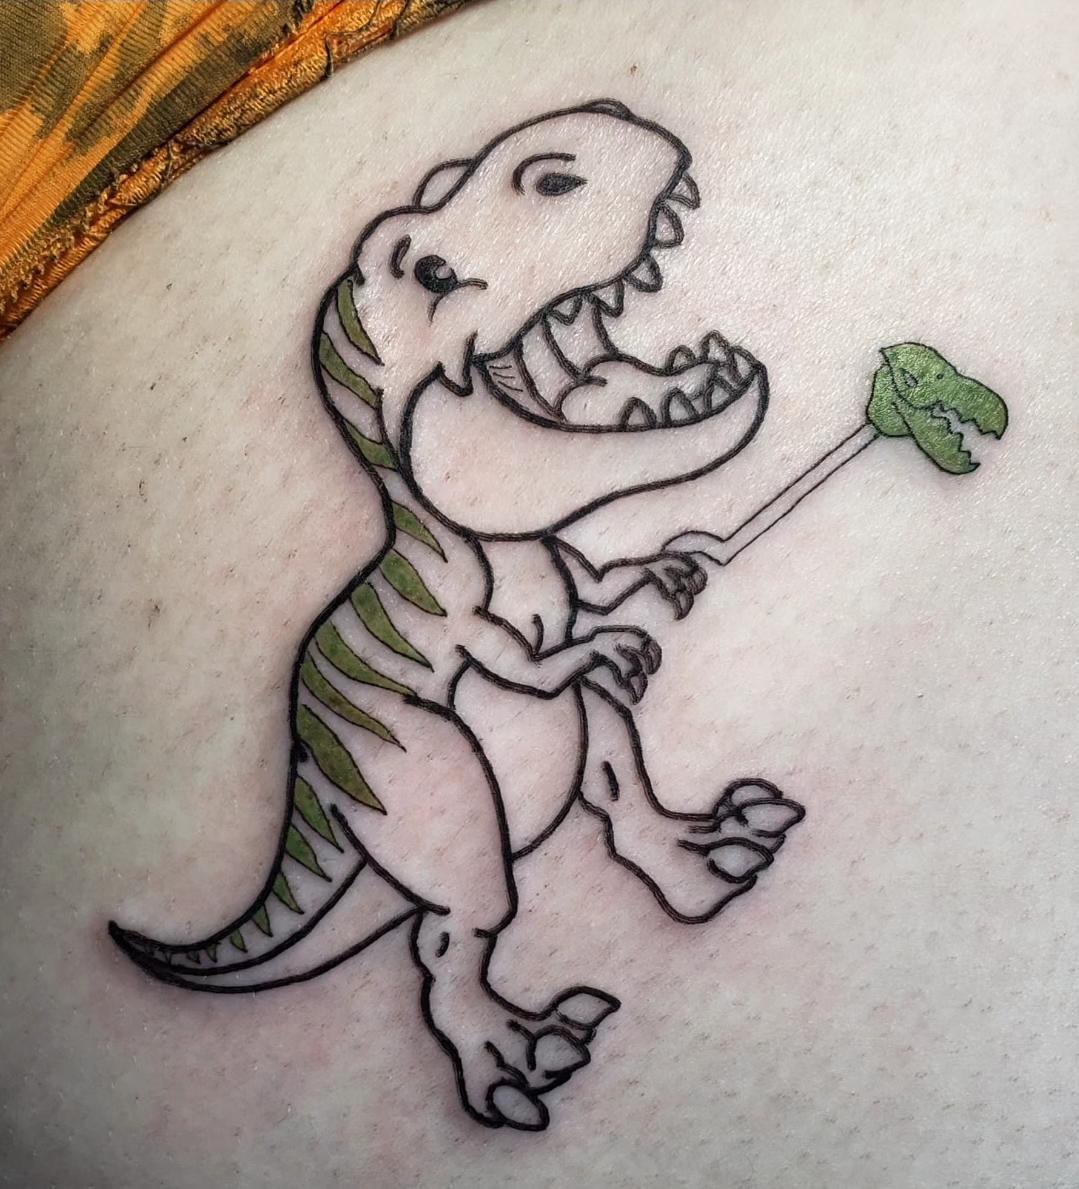 Black and grey stylized tattoo of a dinosaur holding a green dinosaur toy.